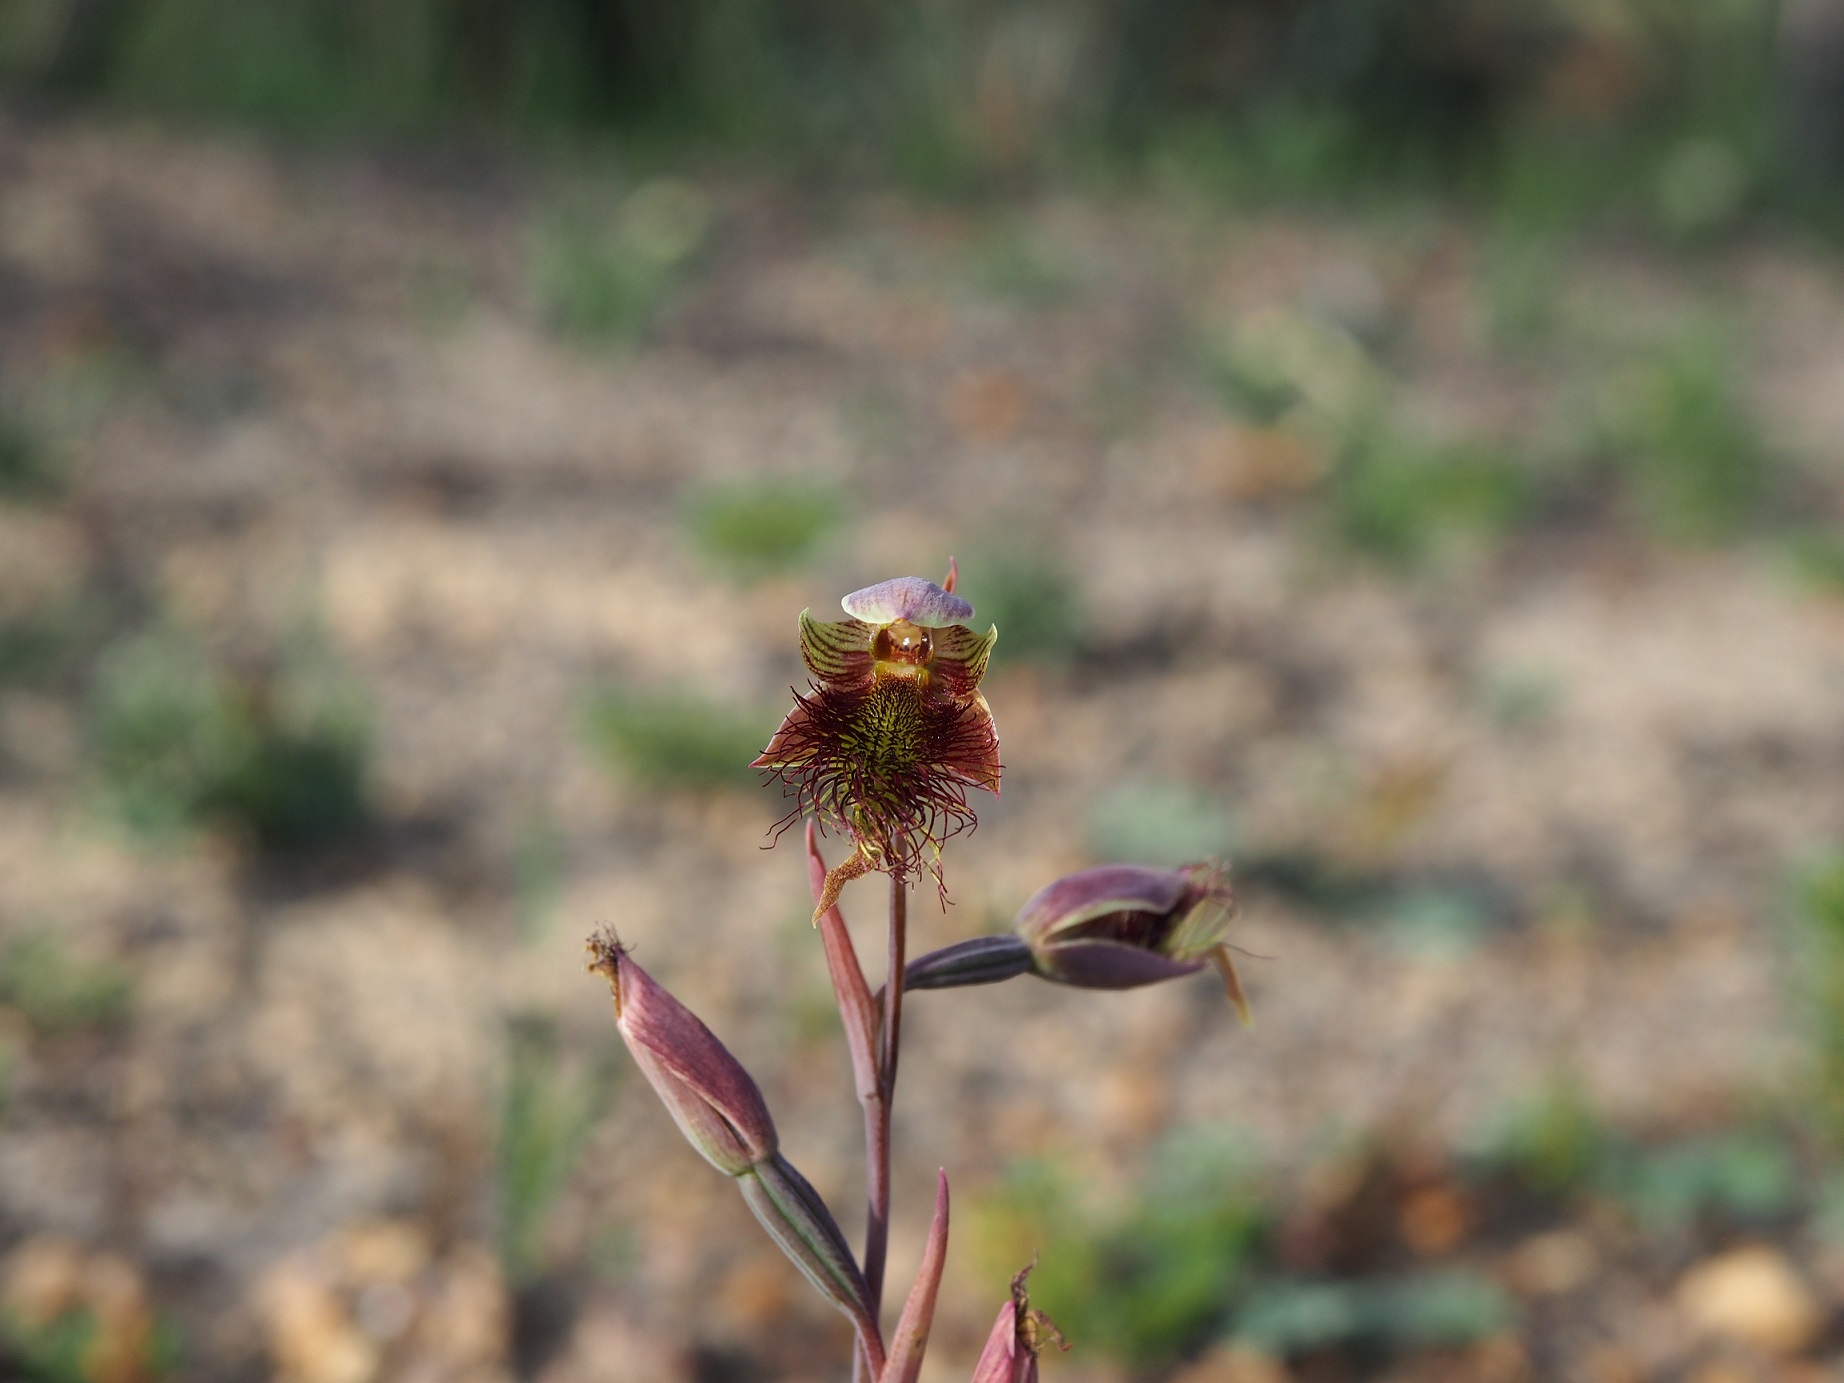 Flowering spike of Calochilus paludosus with two buds and one green and red flower showing the characteristic red hairs